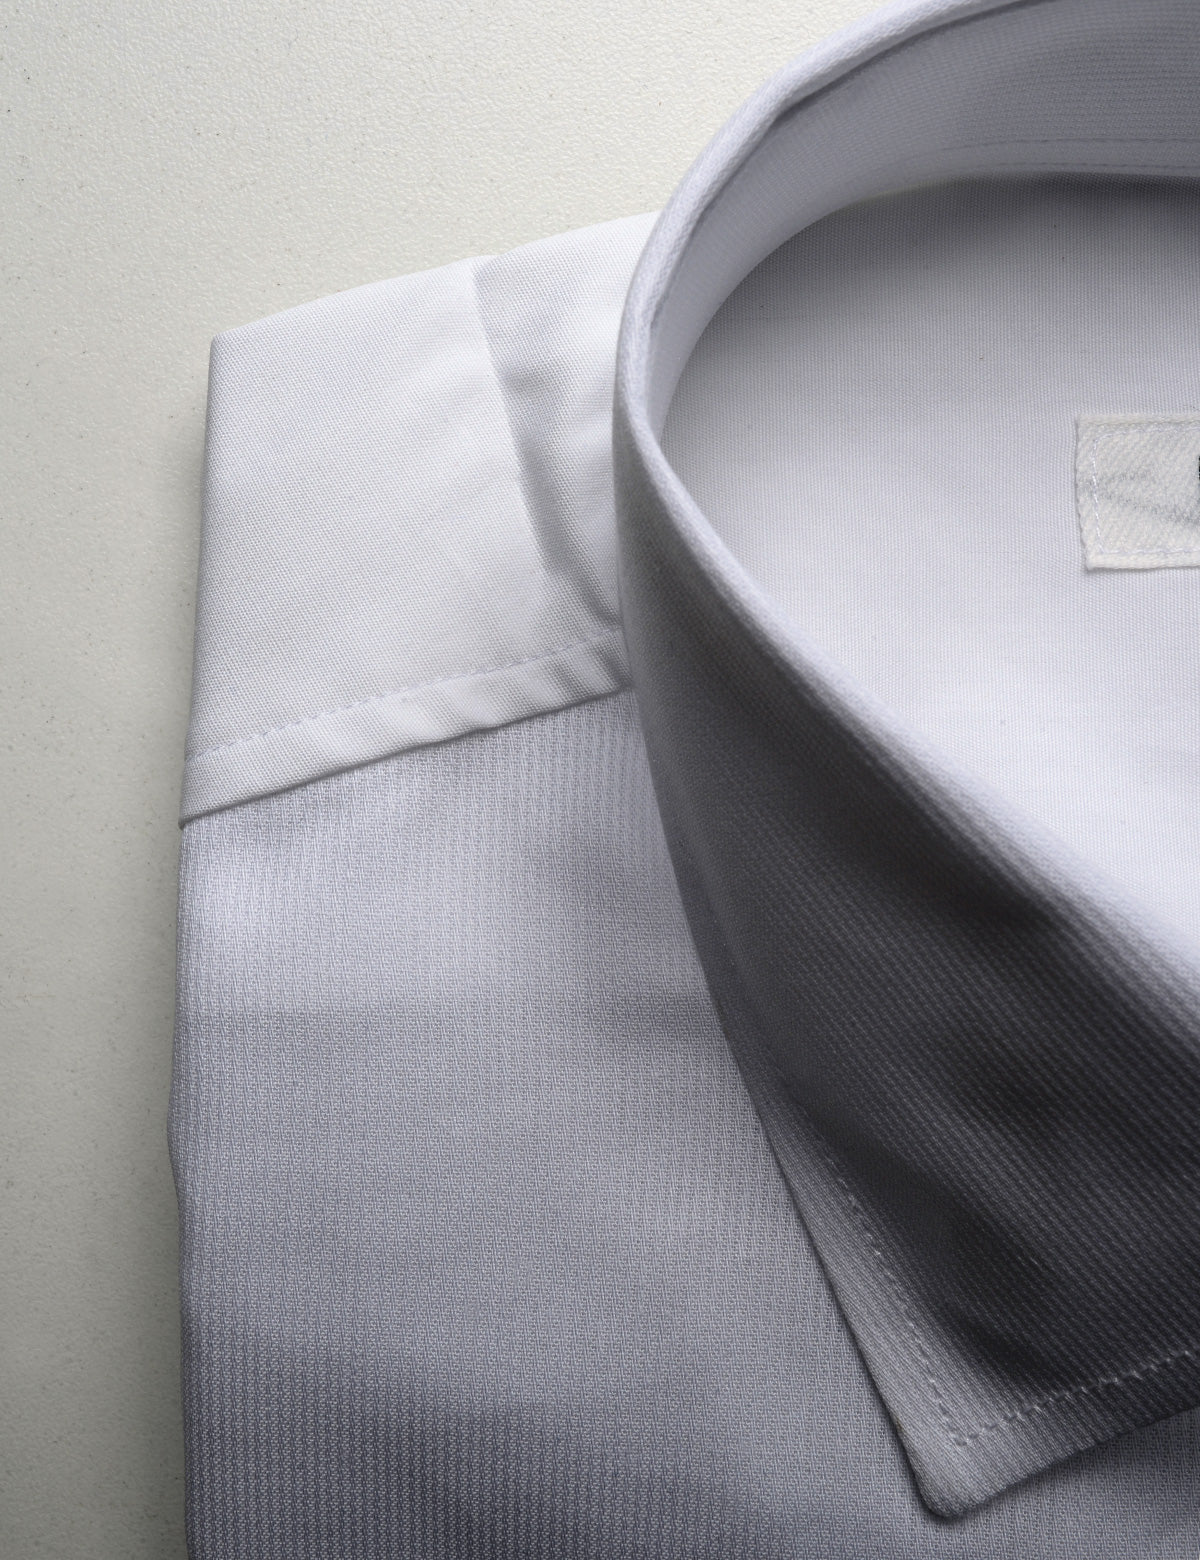 Detail showing front and back fabrics of French Cuff Tuxedo Shirt With Removeable Buttons - Bar Pique